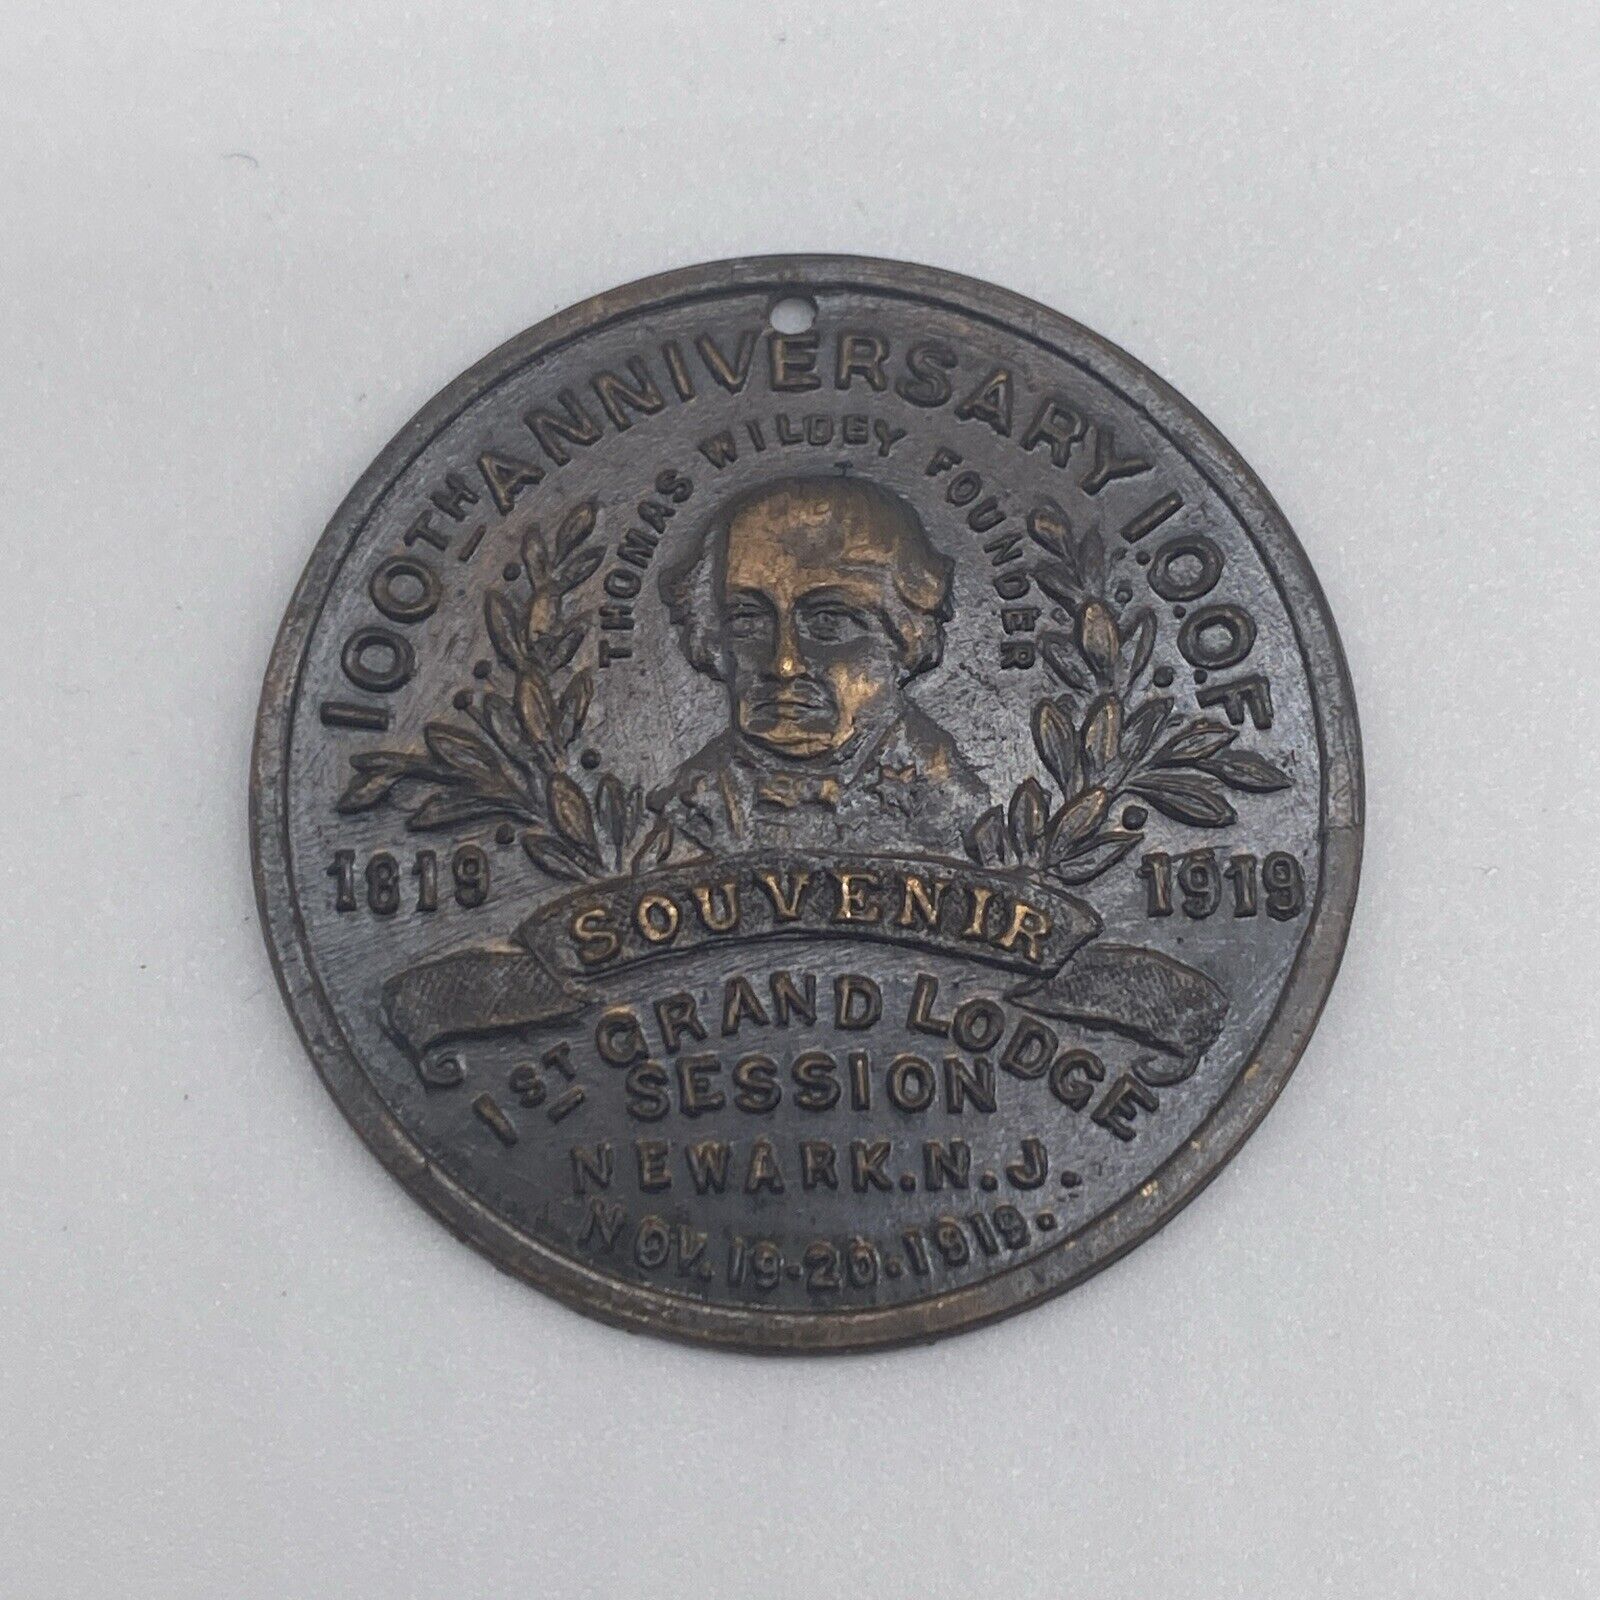 Vintage IOOF Odd Fellows 100 Year Anniversary Coin Medal